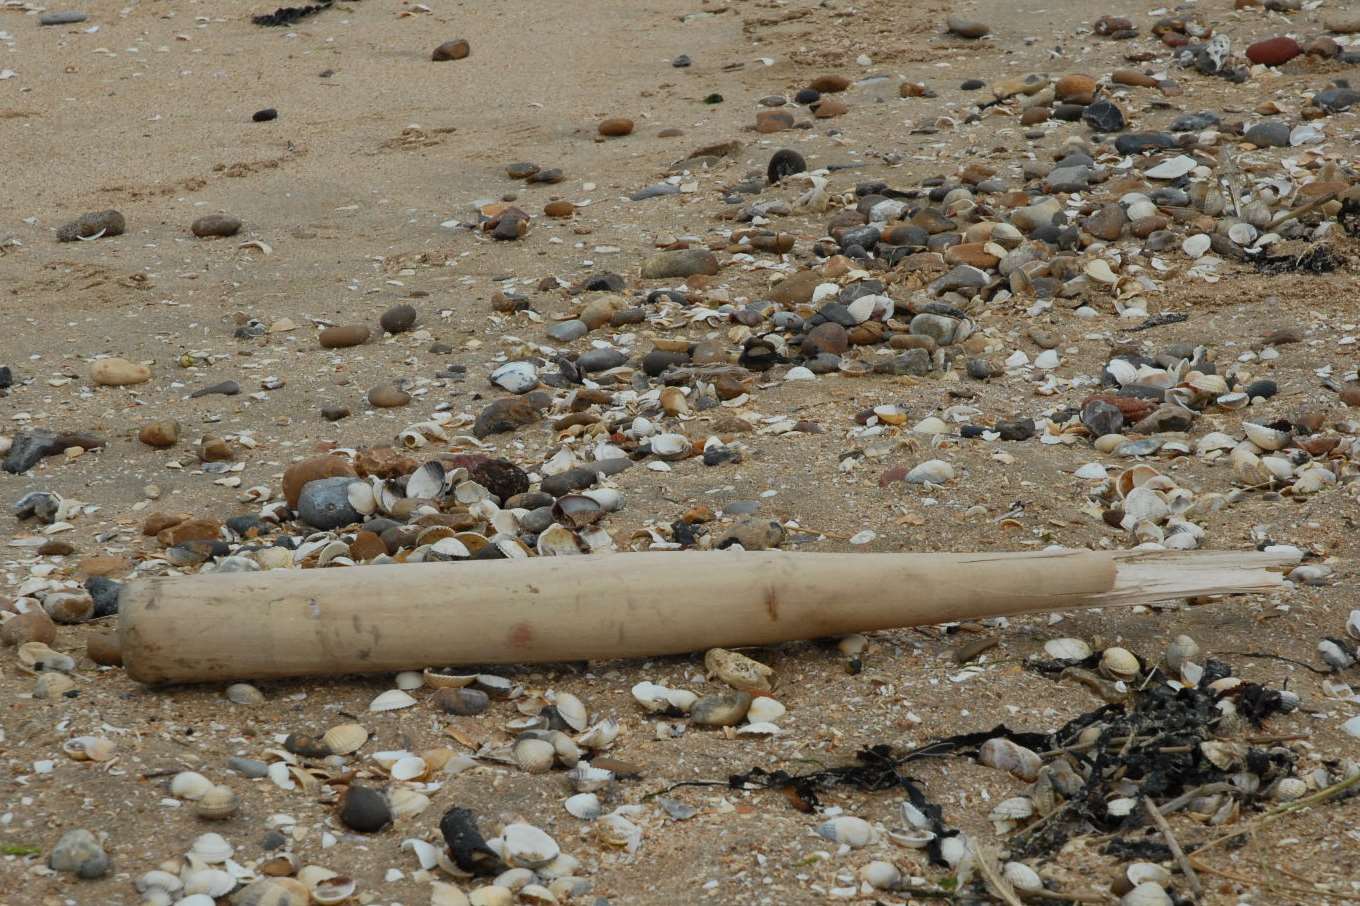 A bloodied baseball bat found on the beach at Warden by detectives